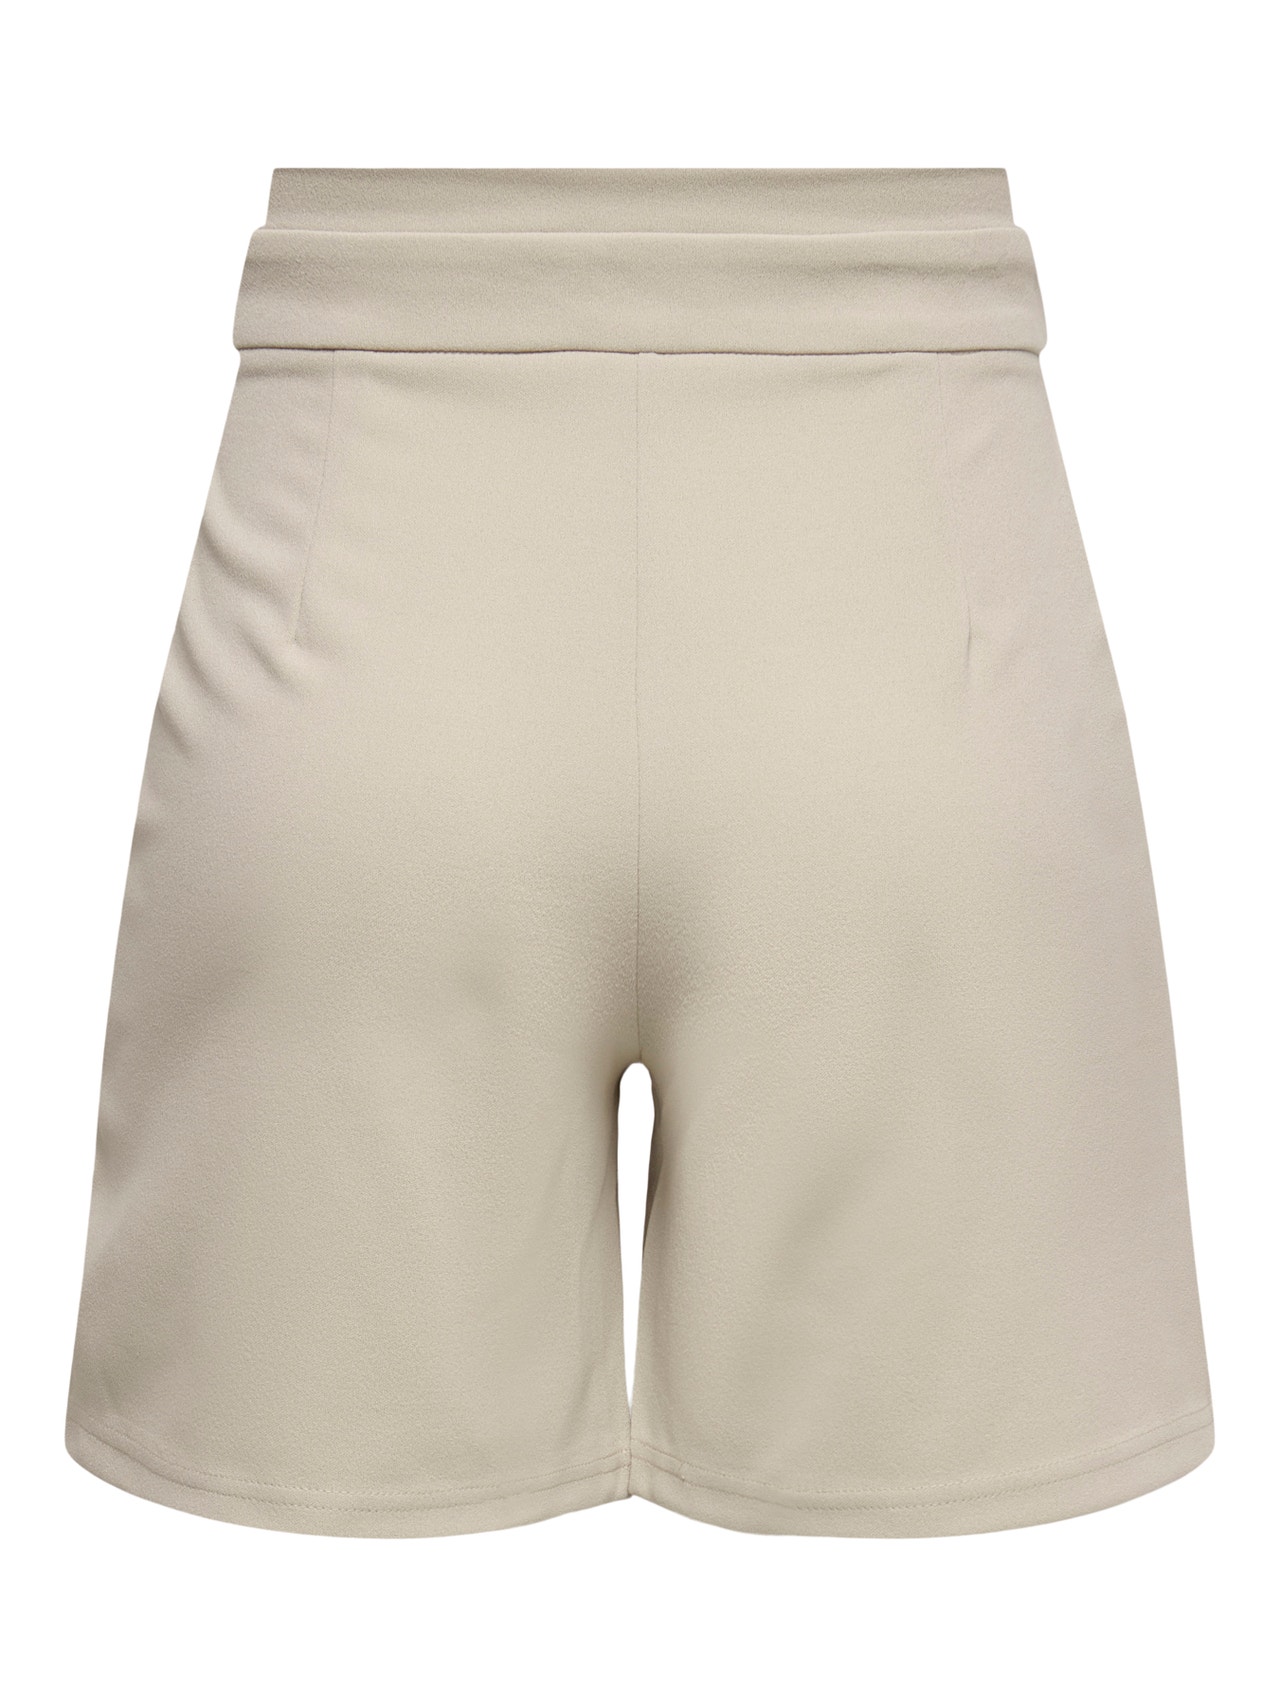 ONLY Belt Shorts -Chateau Gray - 15257246